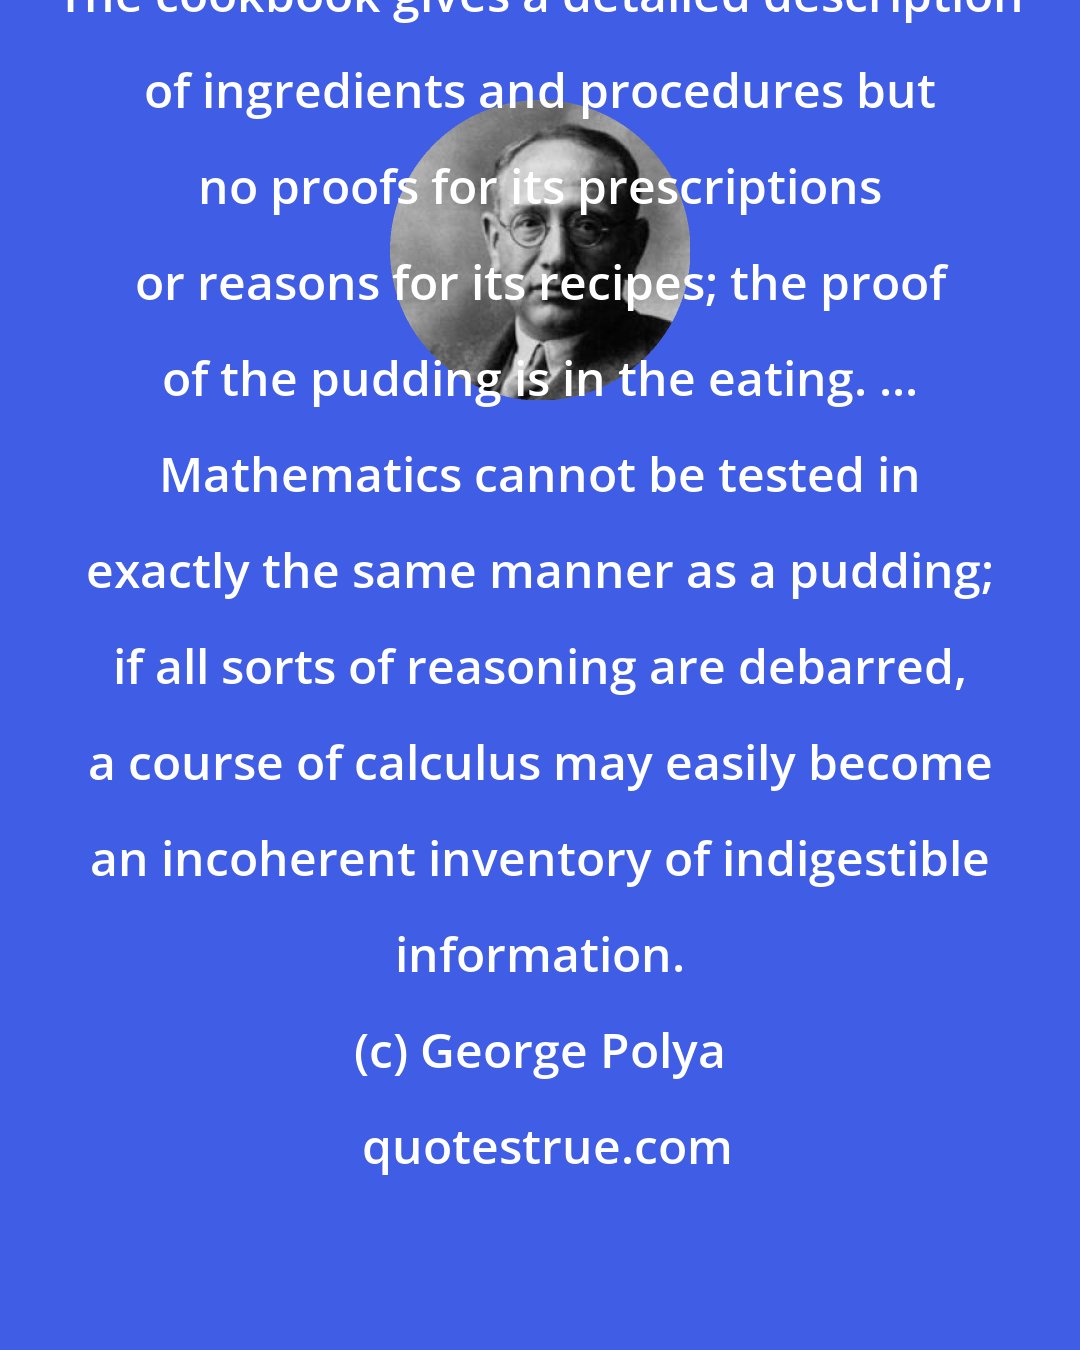 George Polya: The cookbook gives a detailed description of ingredients and procedures but no proofs for its prescriptions or reasons for its recipes; the proof of the pudding is in the eating. ... Mathematics cannot be tested in exactly the same manner as a pudding; if all sorts of reasoning are debarred, a course of calculus may easily become an incoherent inventory of indigestible information.